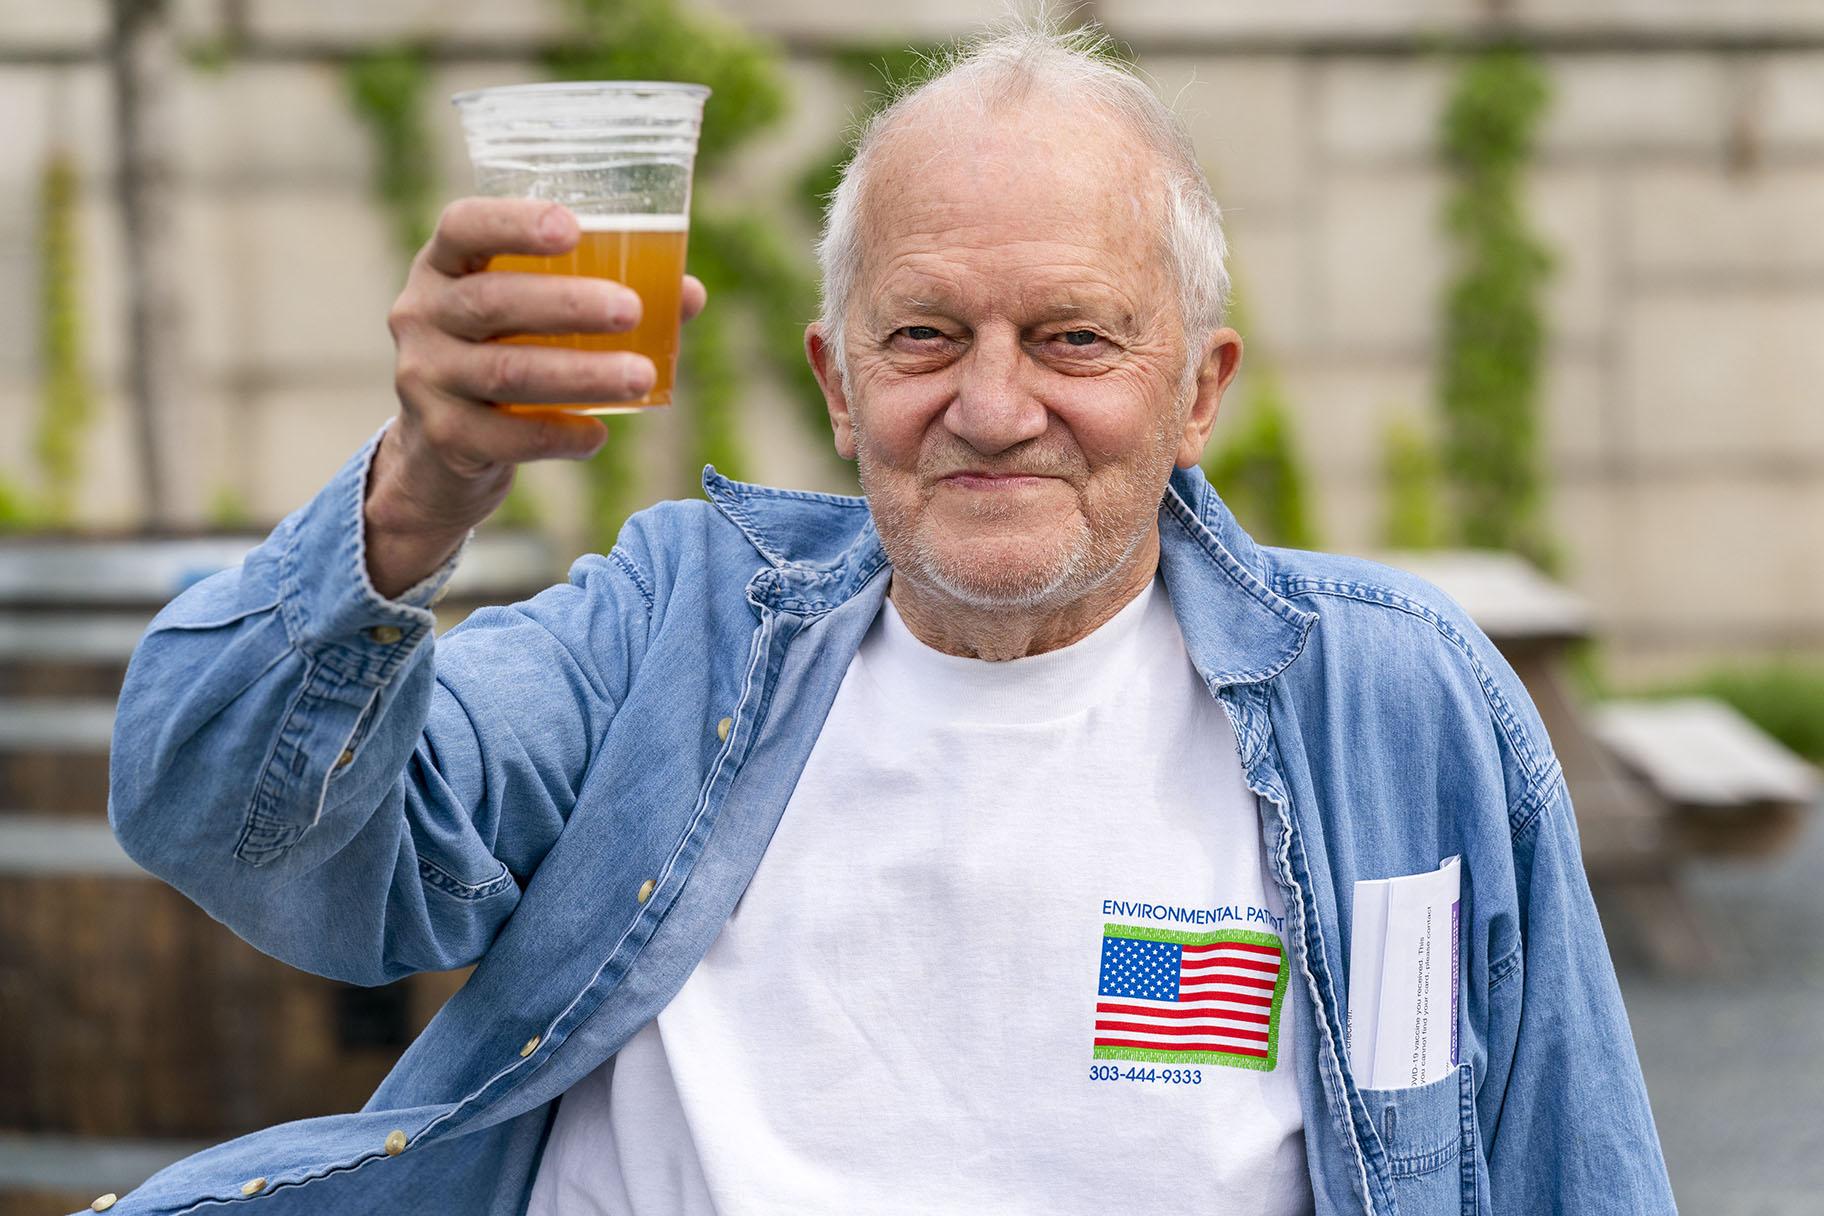 In this May 6, 2021 photo, George Ripley, 72, of Washington, holds up his free beer after receiving the J&J COVID-19 vaccine shot, at The REACH at the Kennedy Center in Washington. (AP Photo / Jacquelyn Martin)